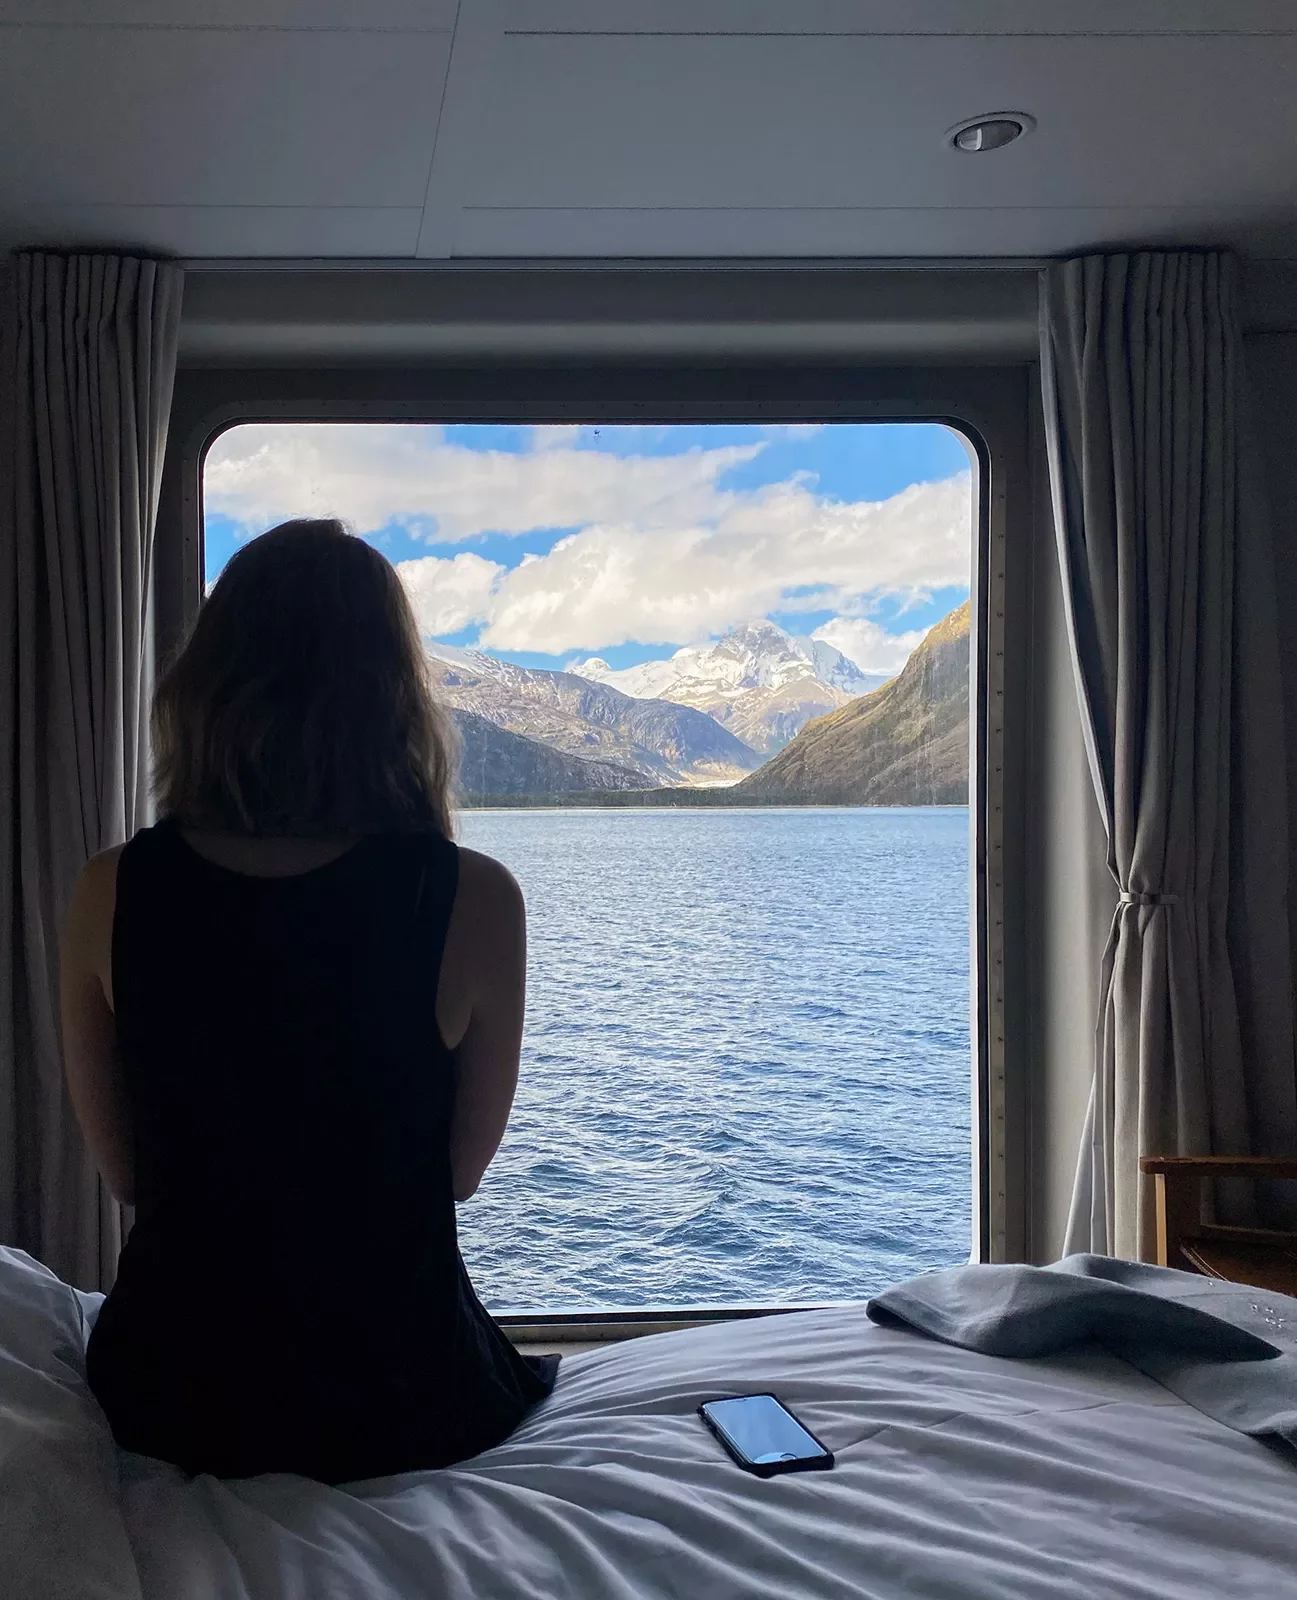 Guest on cruise ship in room, looking out towards mountains.